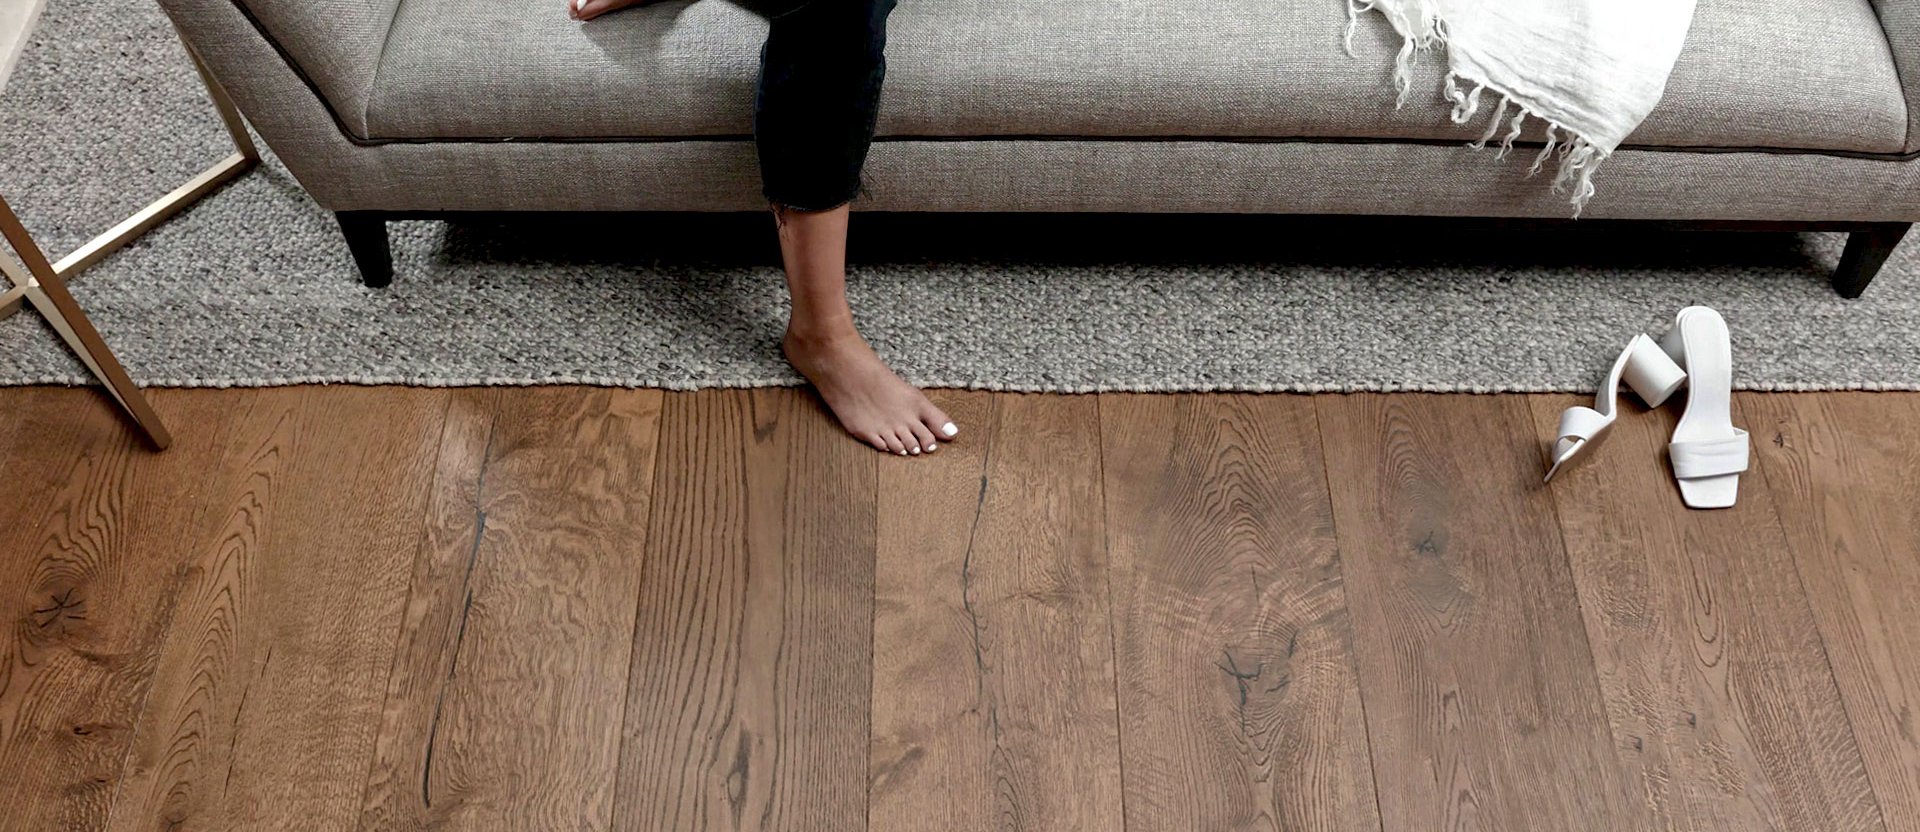 5 Reasons to Choose Prefinished over Unfinished Wood Floors